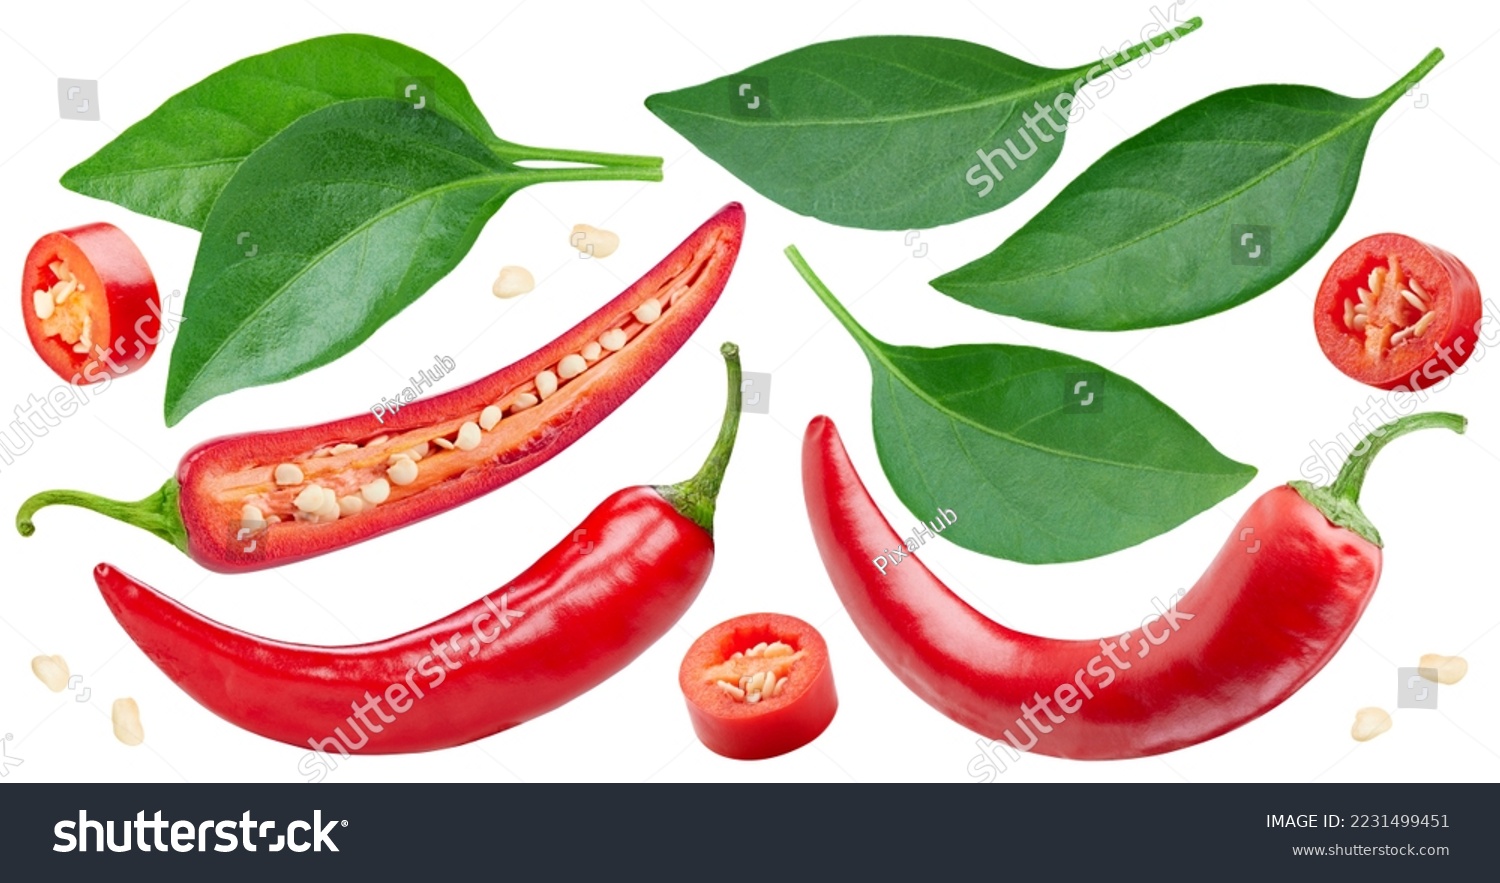 Collection chili pepper with leaves. Red hot chili pepper isolated on white background. Hot pepper fruit clipping path. Chili macro studio photo #2231499451